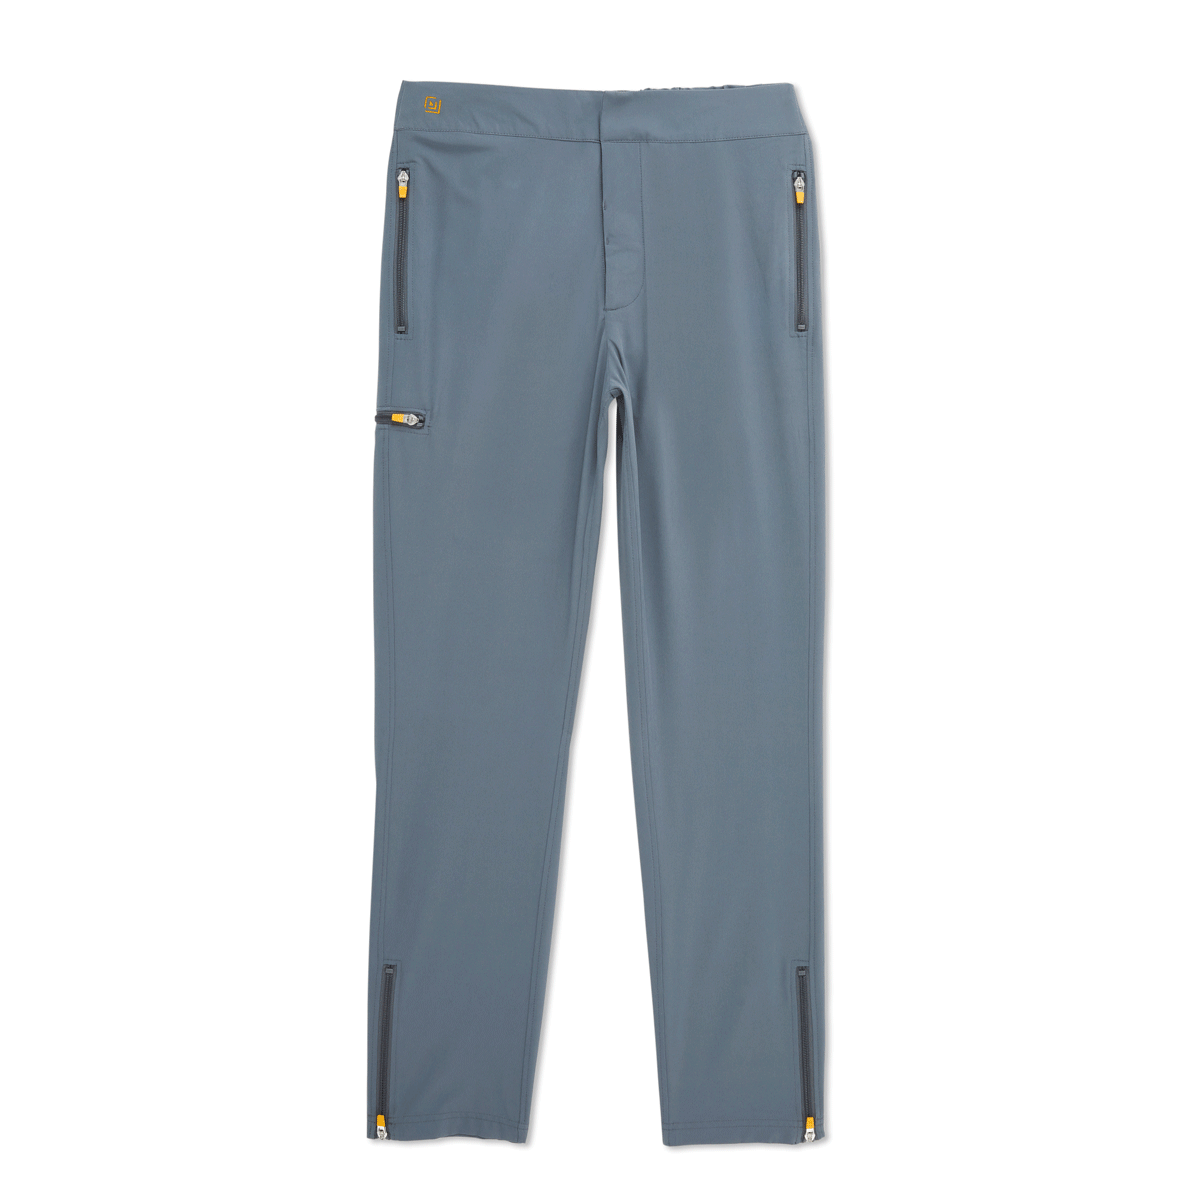 Uniqlo JW Anderson HEATTECH Warm Lined Pants Medium out for sale online